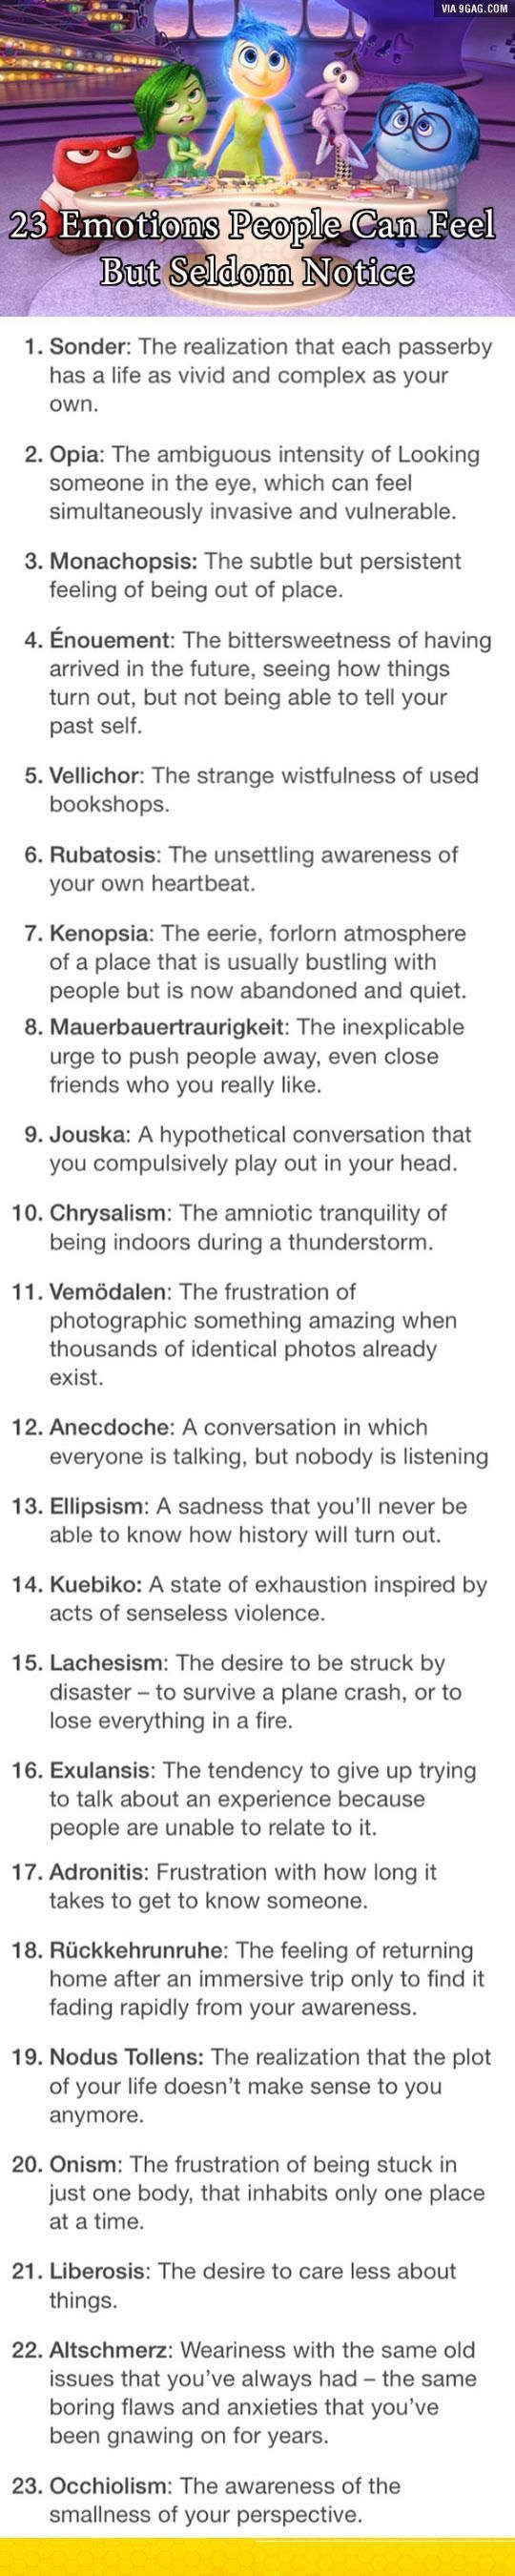 23 Emotions People Can Feel But Seldom Notice